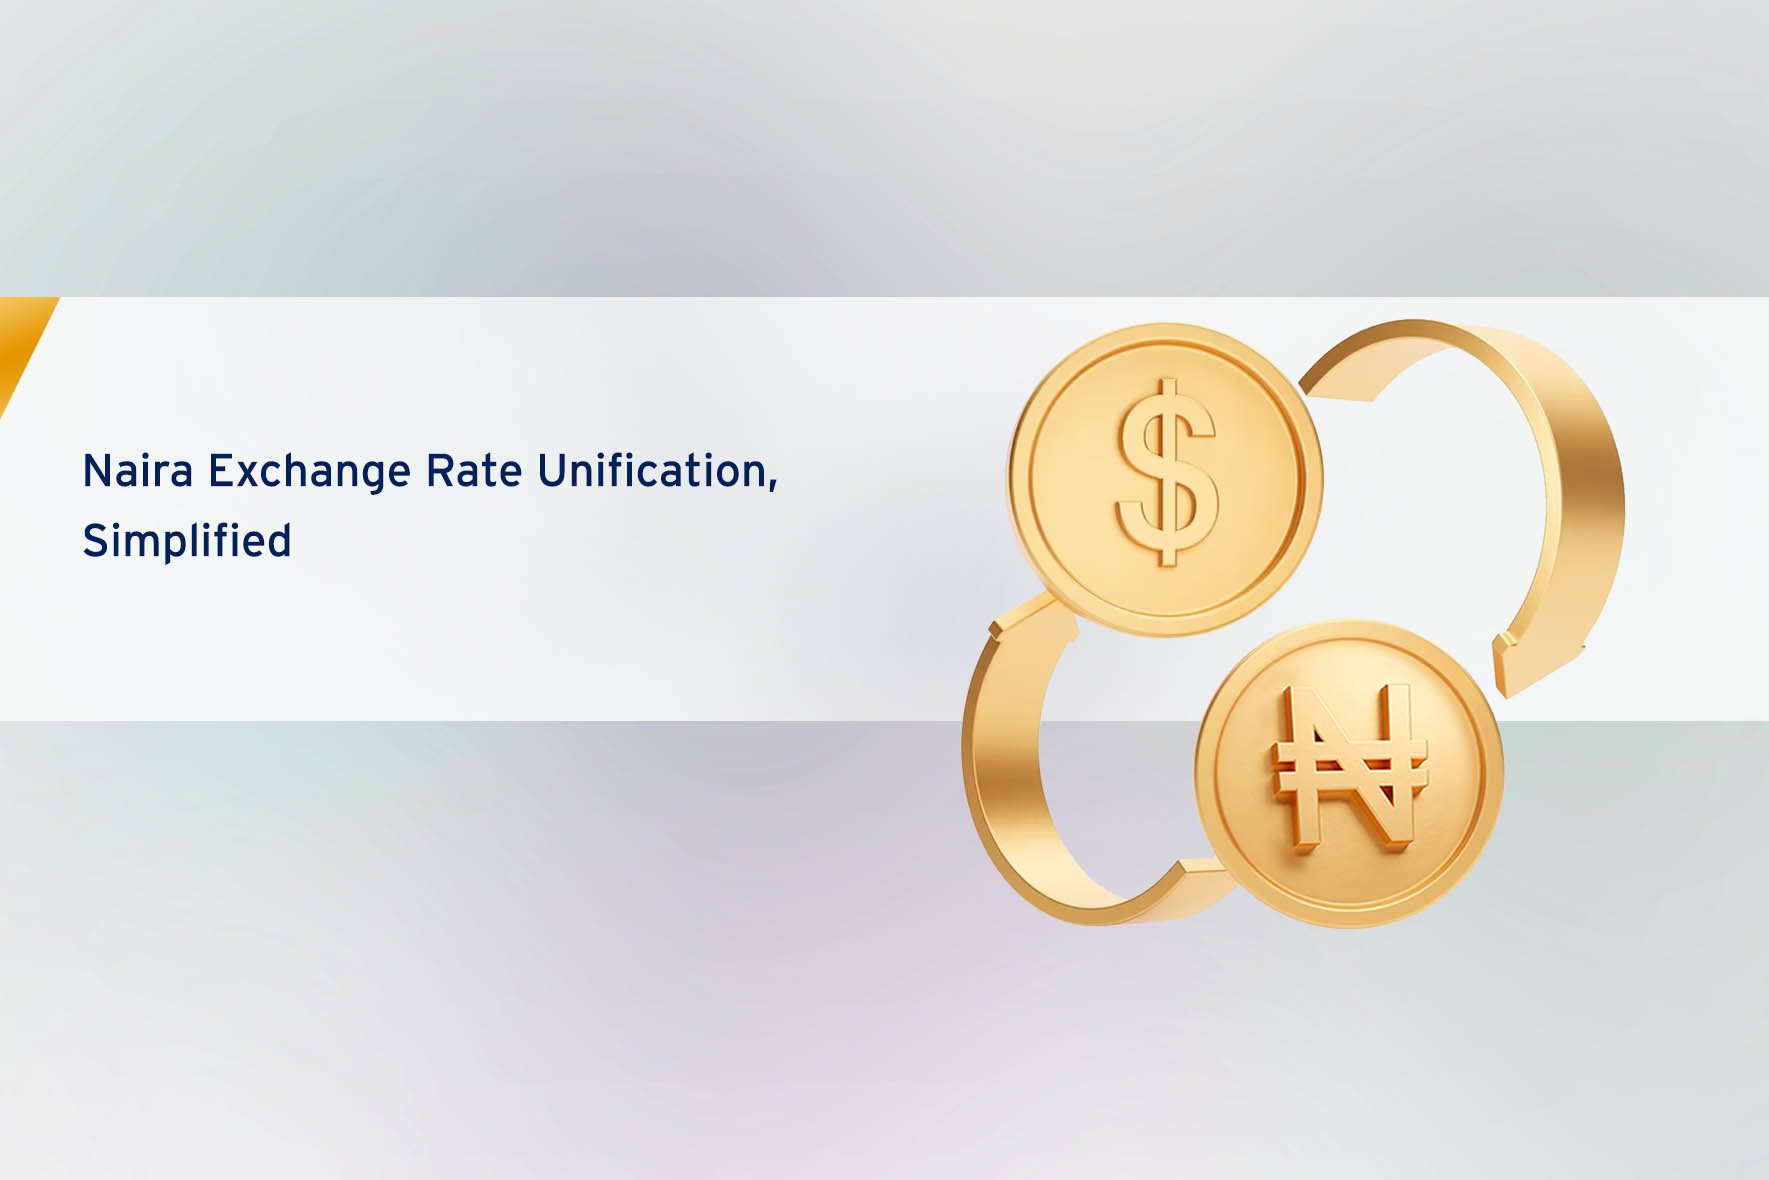 Naira Exchange Rate Unification, Simplified